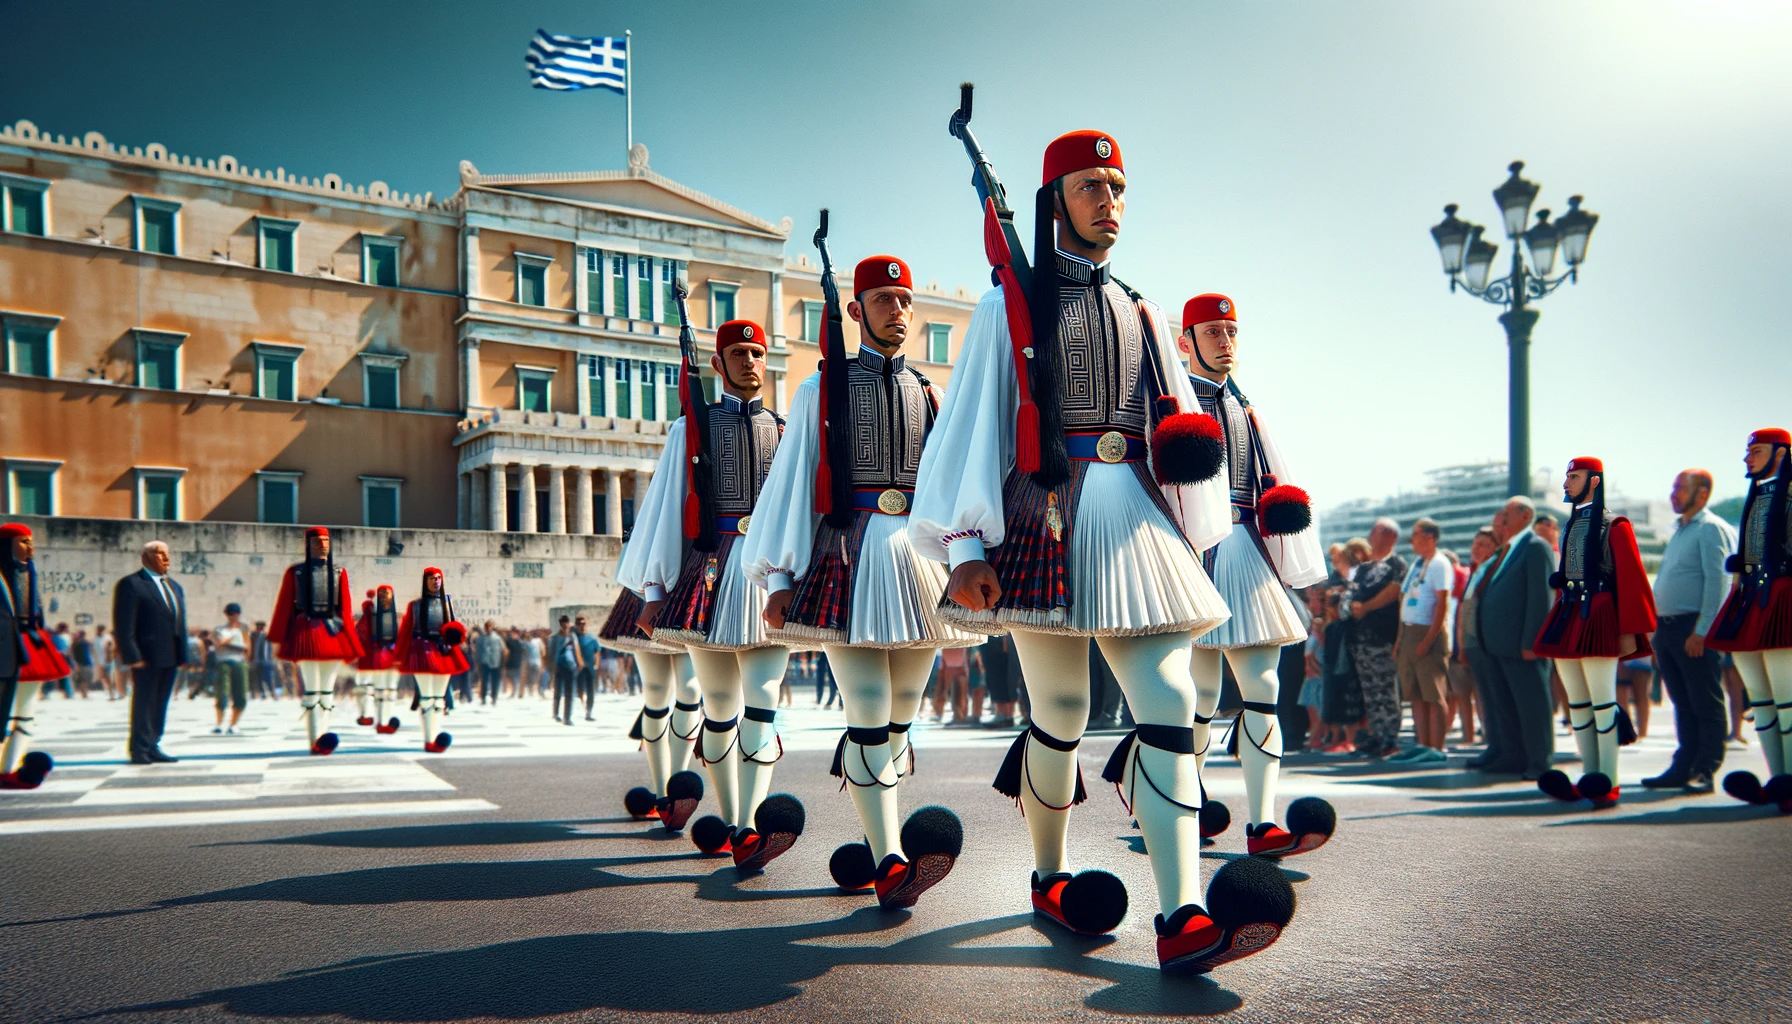 DALL·E 2023 11 26 23.01.08 An ultra realistic image of the Evzones the elite Greek presidential guard in Syntagma Square Athens. The scene shows the traditionally dressed Evz